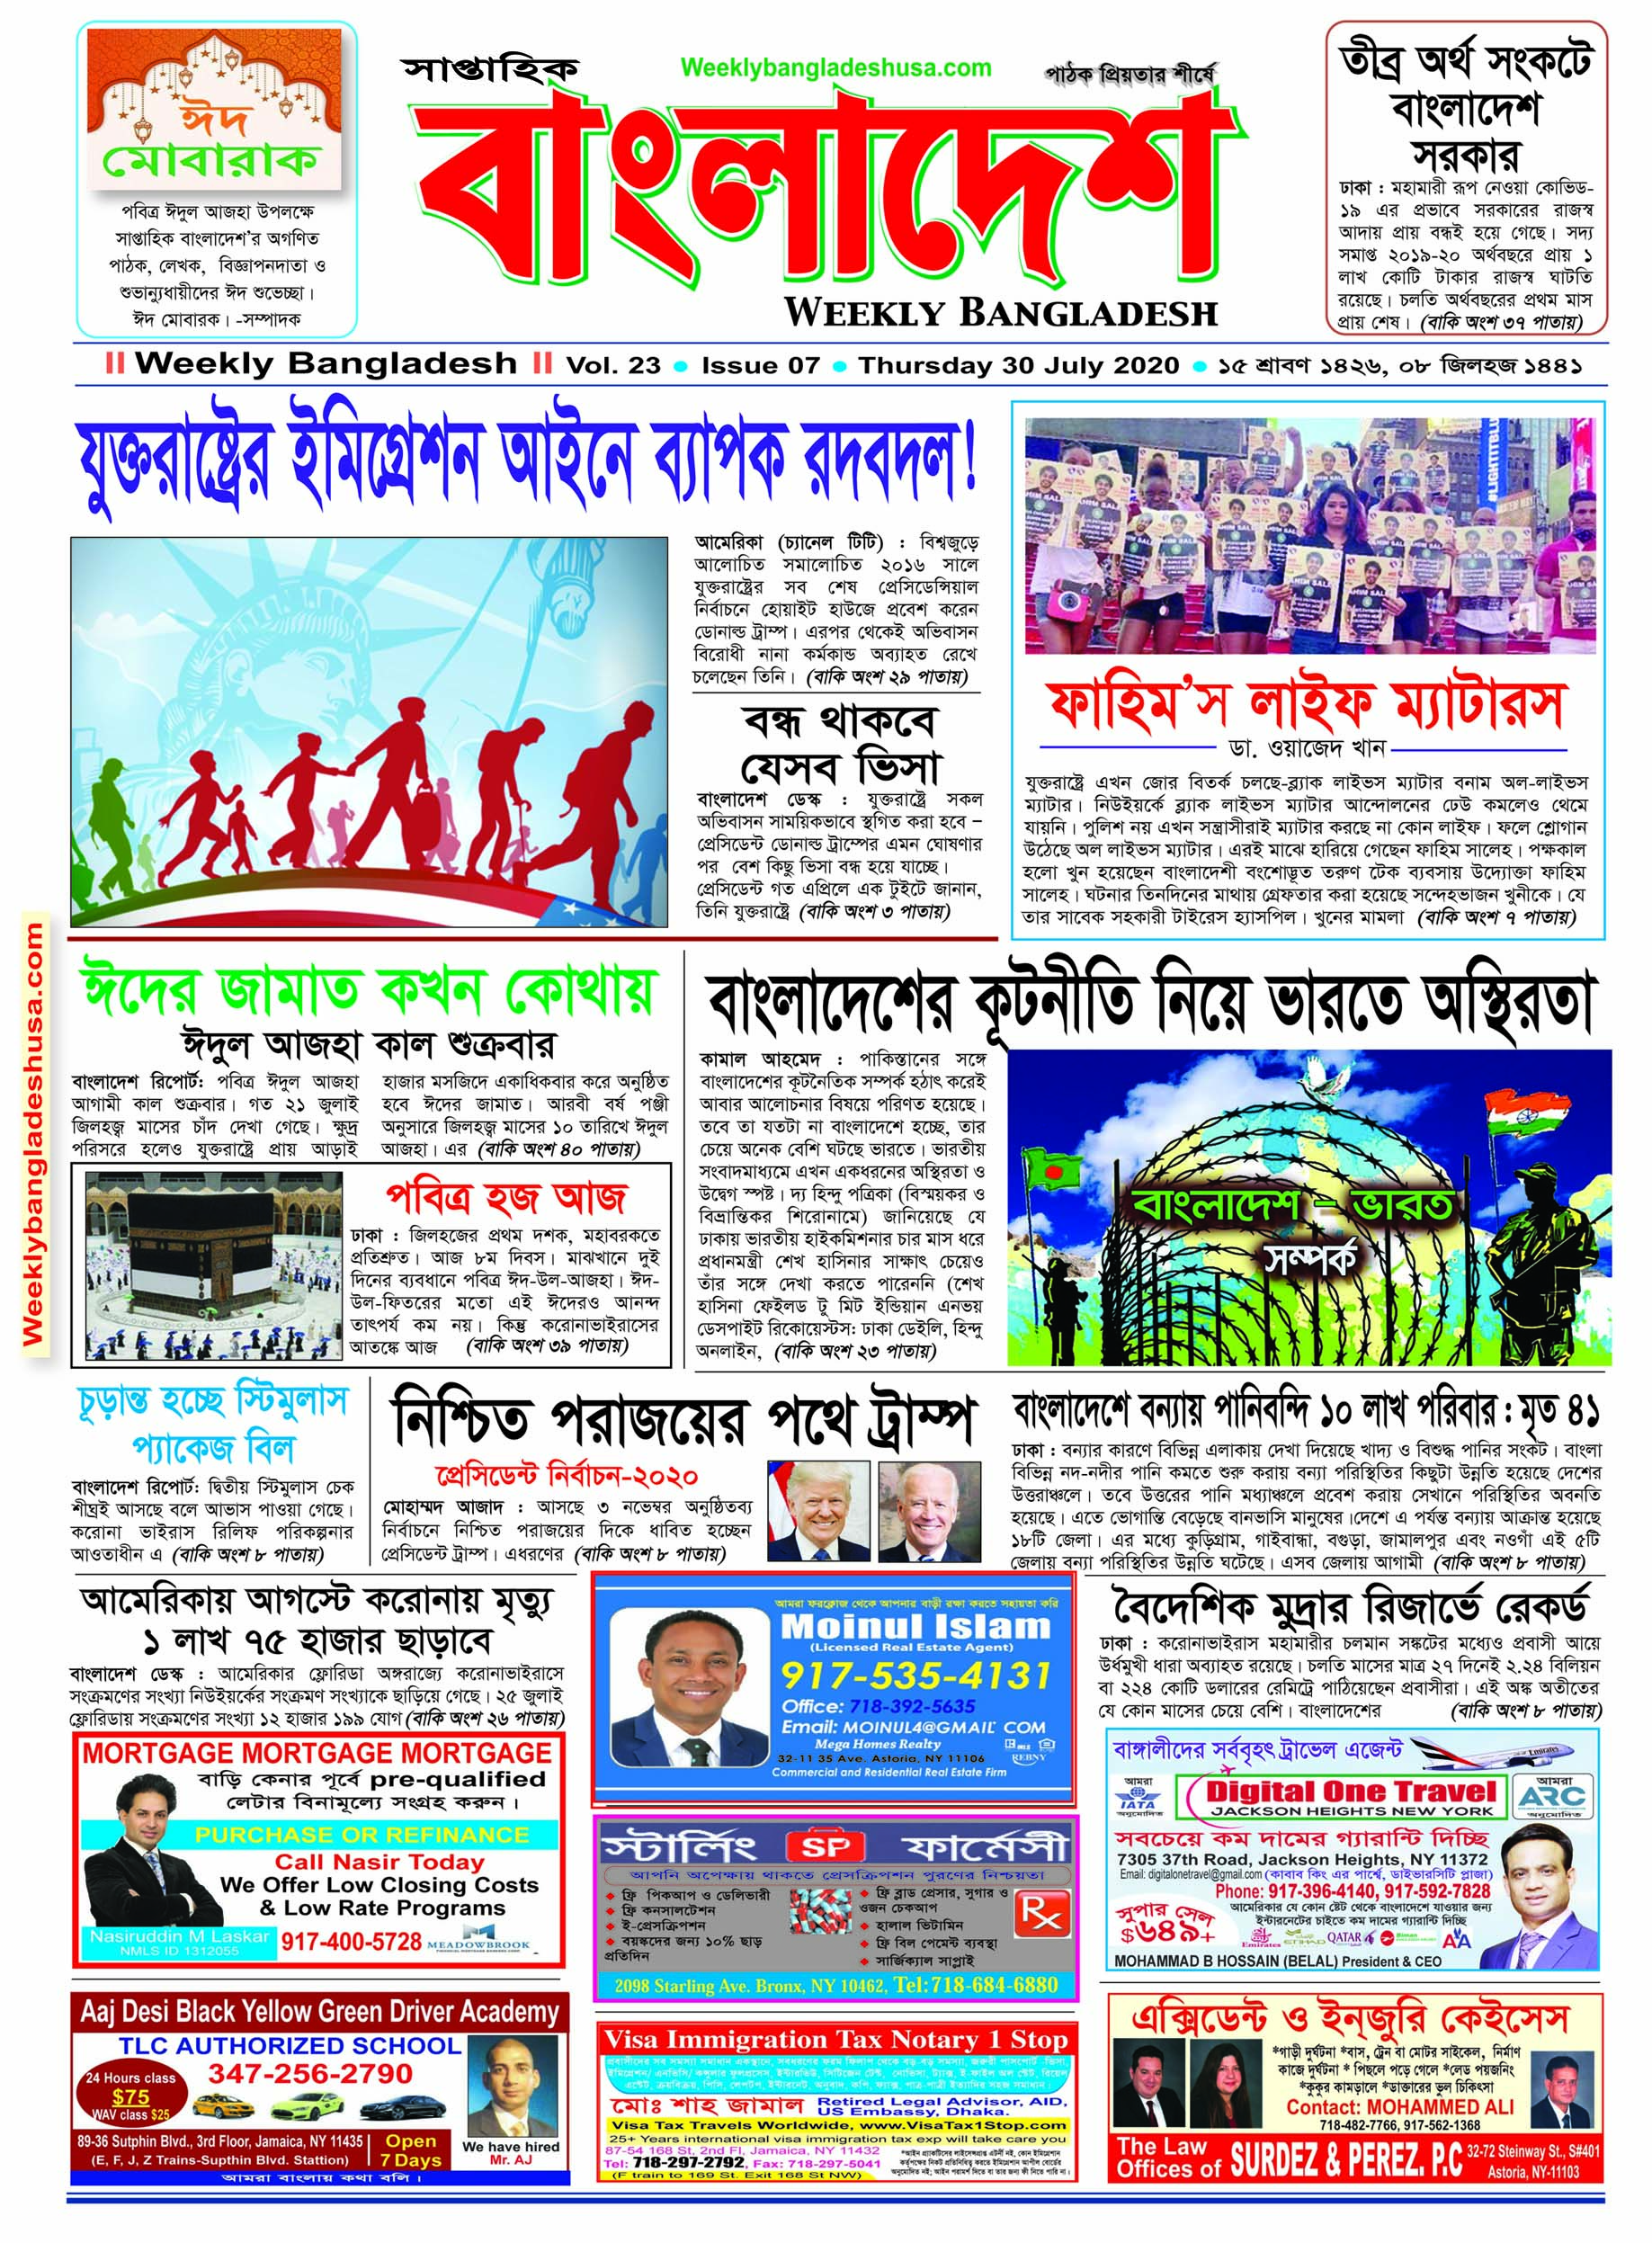 VOL_23_ISSUE 07_30 JULY 2020